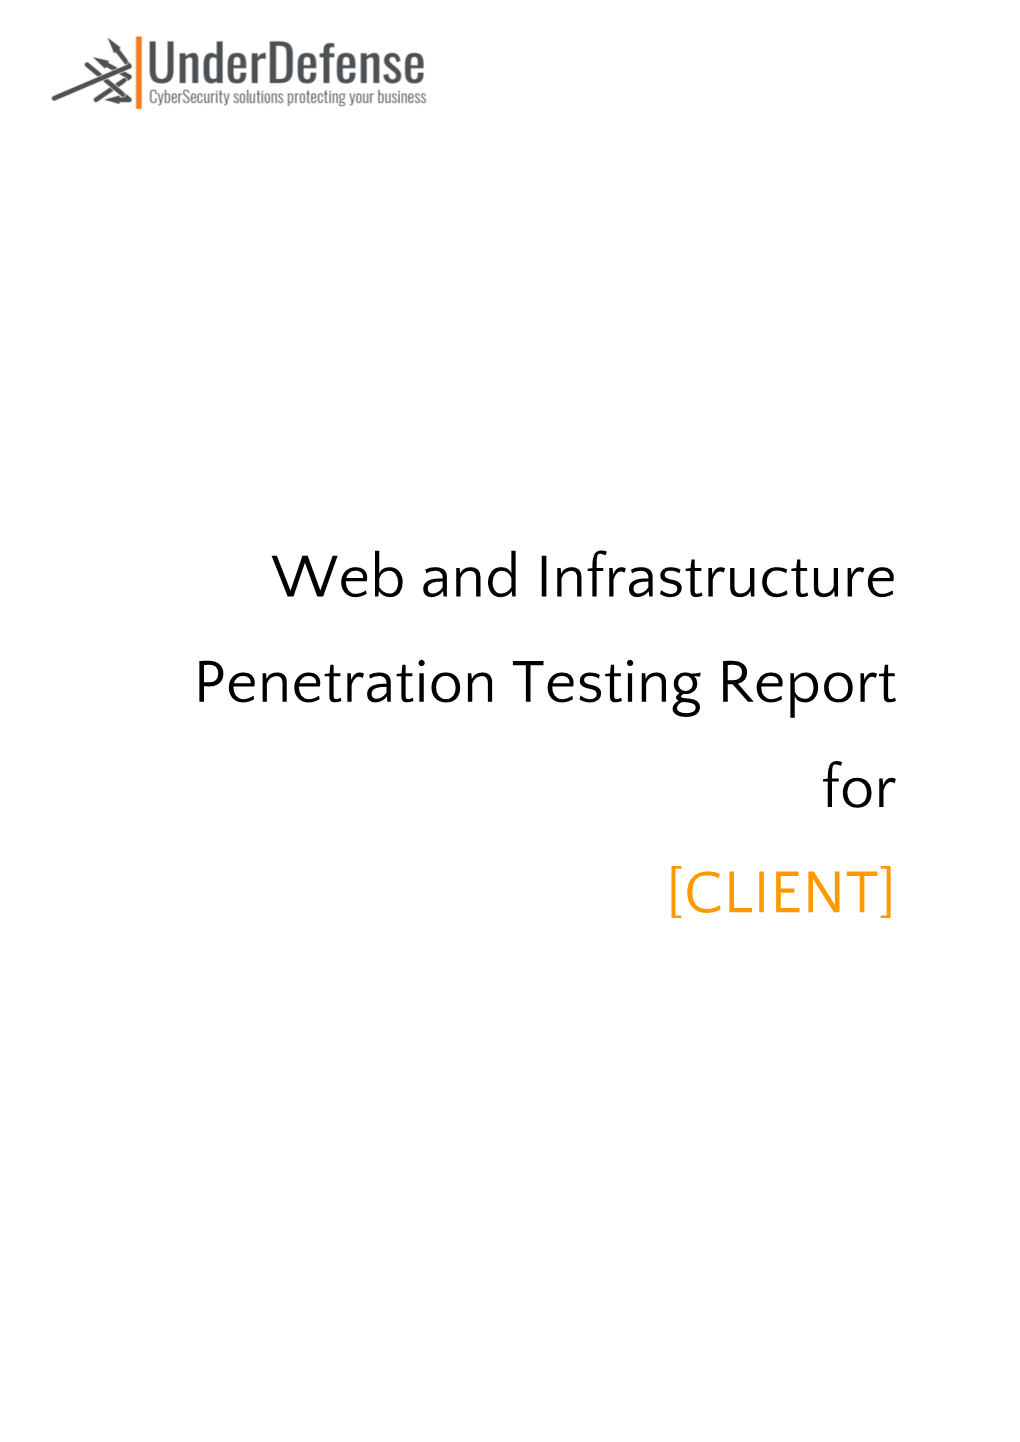 Web and Infrastructure Penetration Testing Report for [CLIENT]